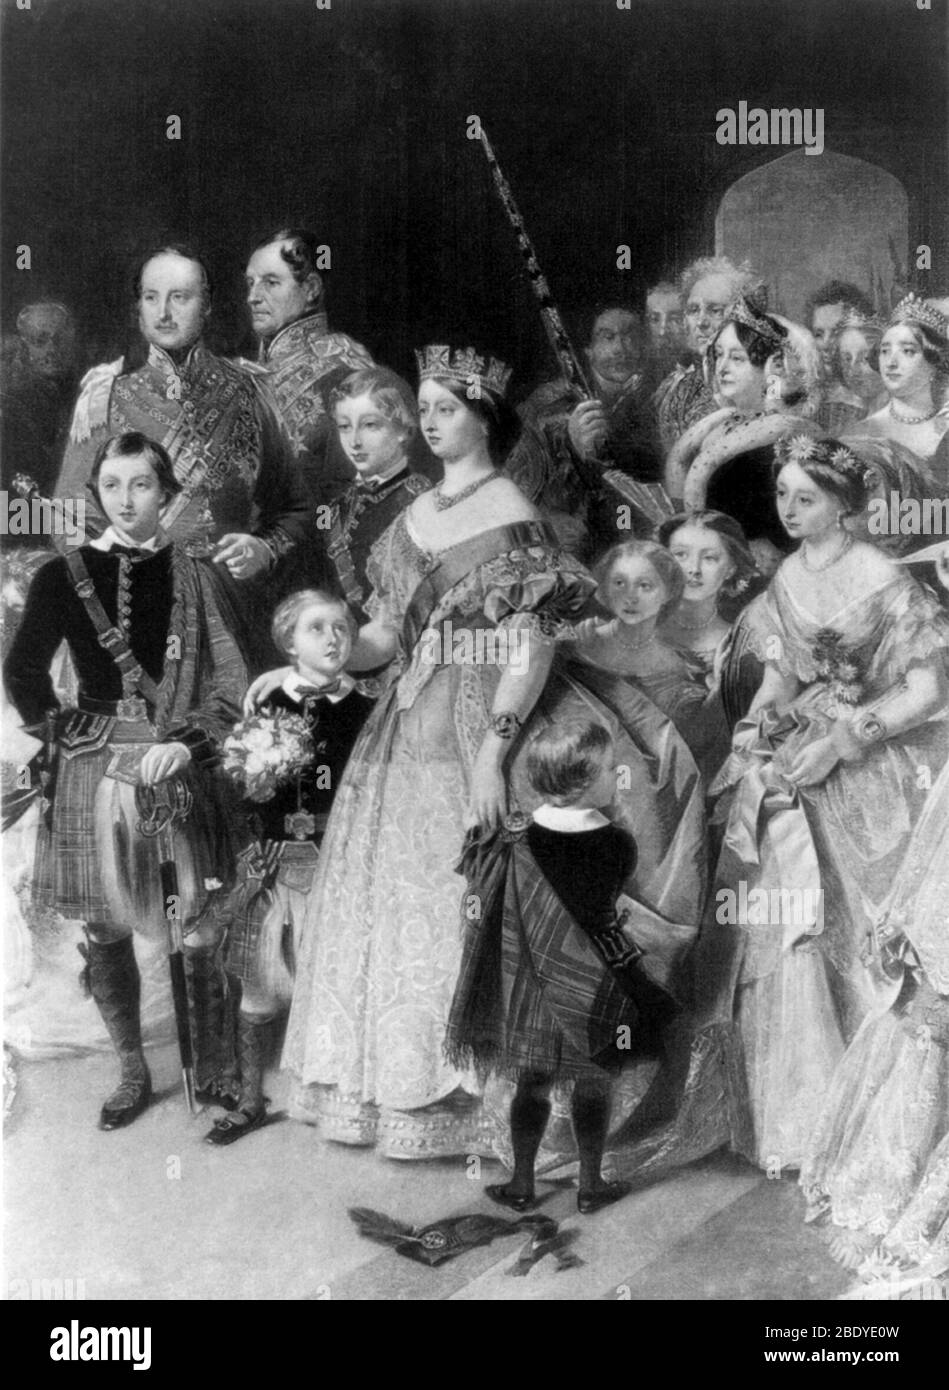 Queen Victoria with Members of Royal Family, 1897 Stock Photo